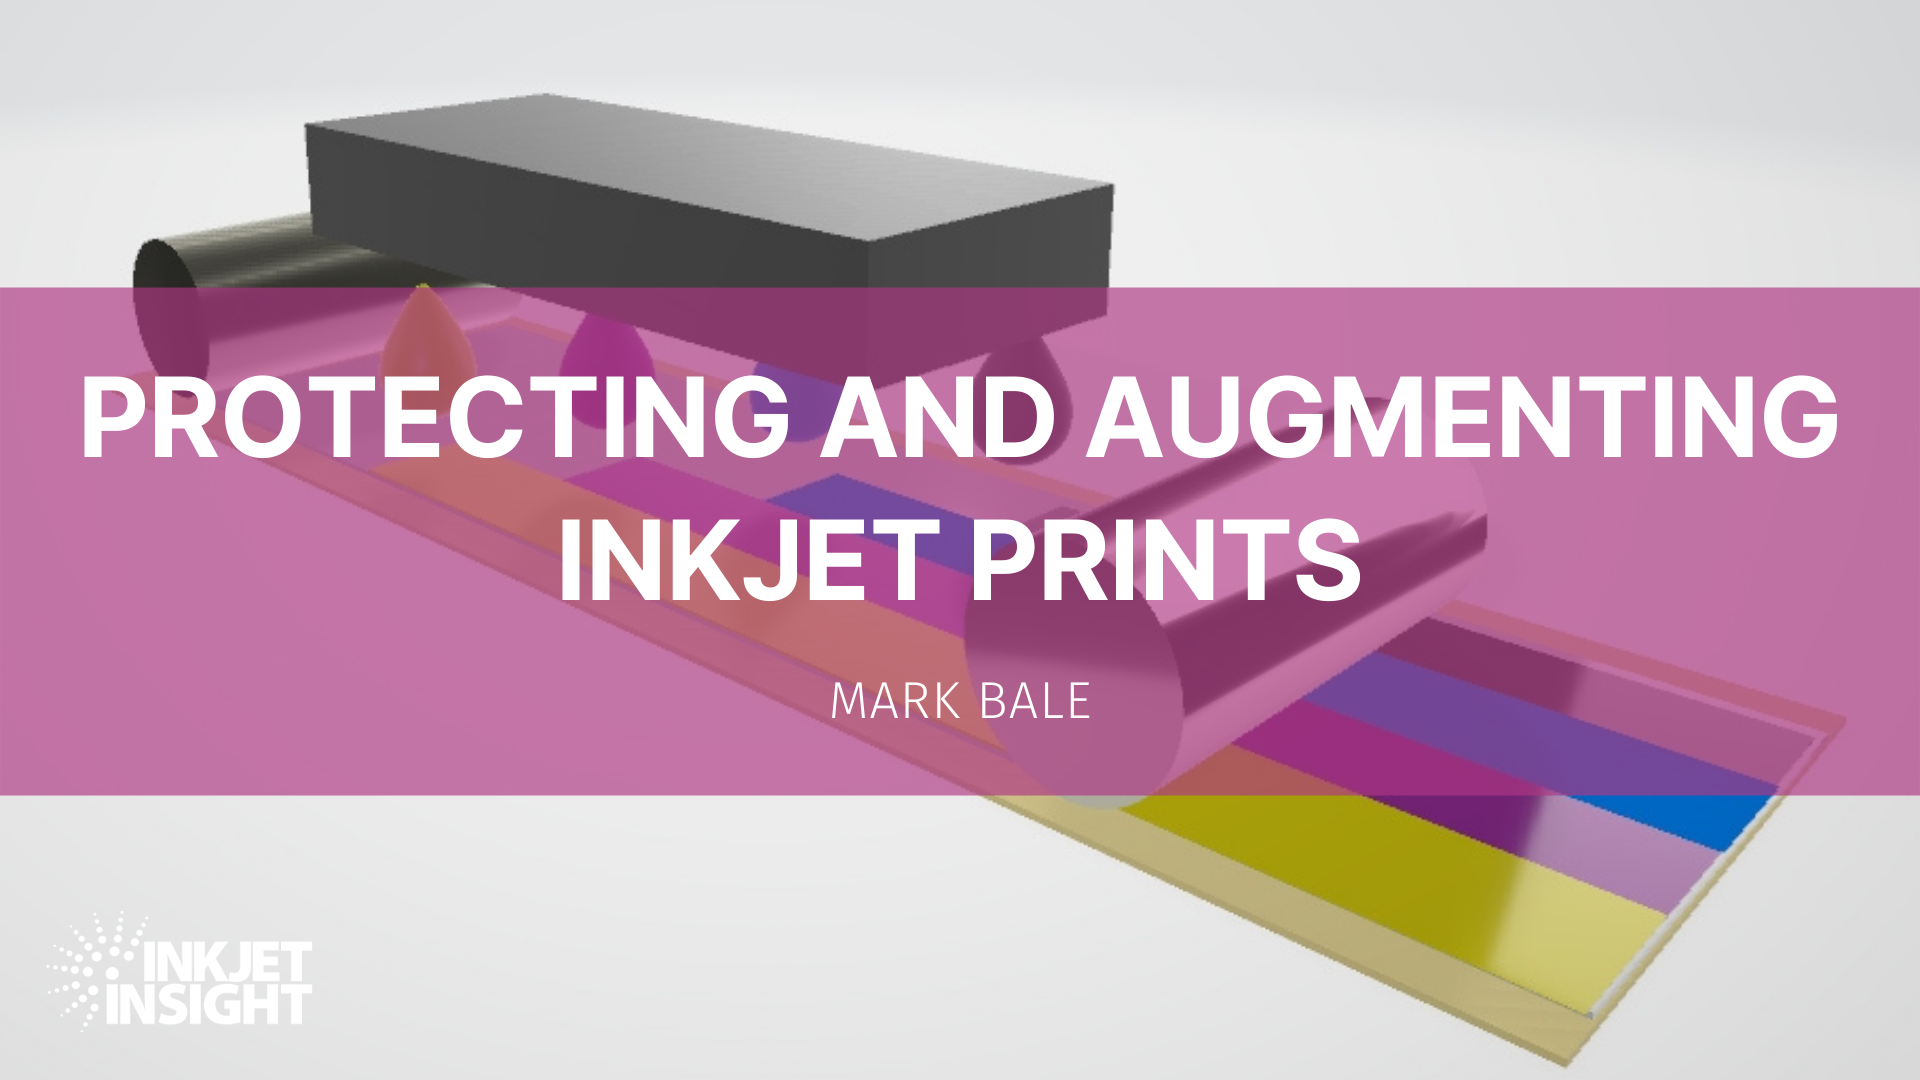 Featured image for “Protecting and Augmenting Inkjet Prints”